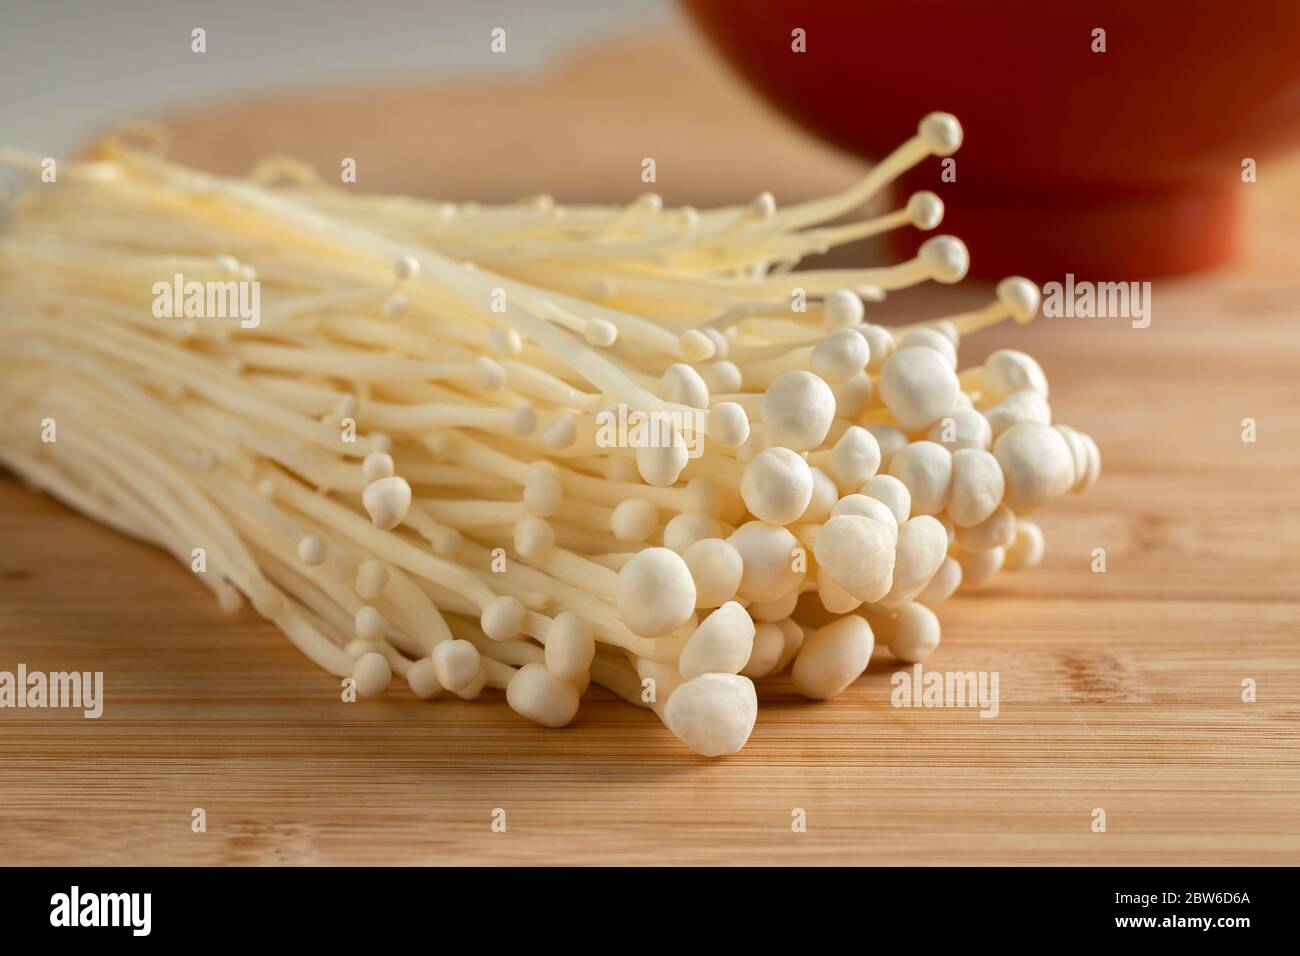 Cluster of fresh cultivated white enokii mushrooms close up Stock Photo